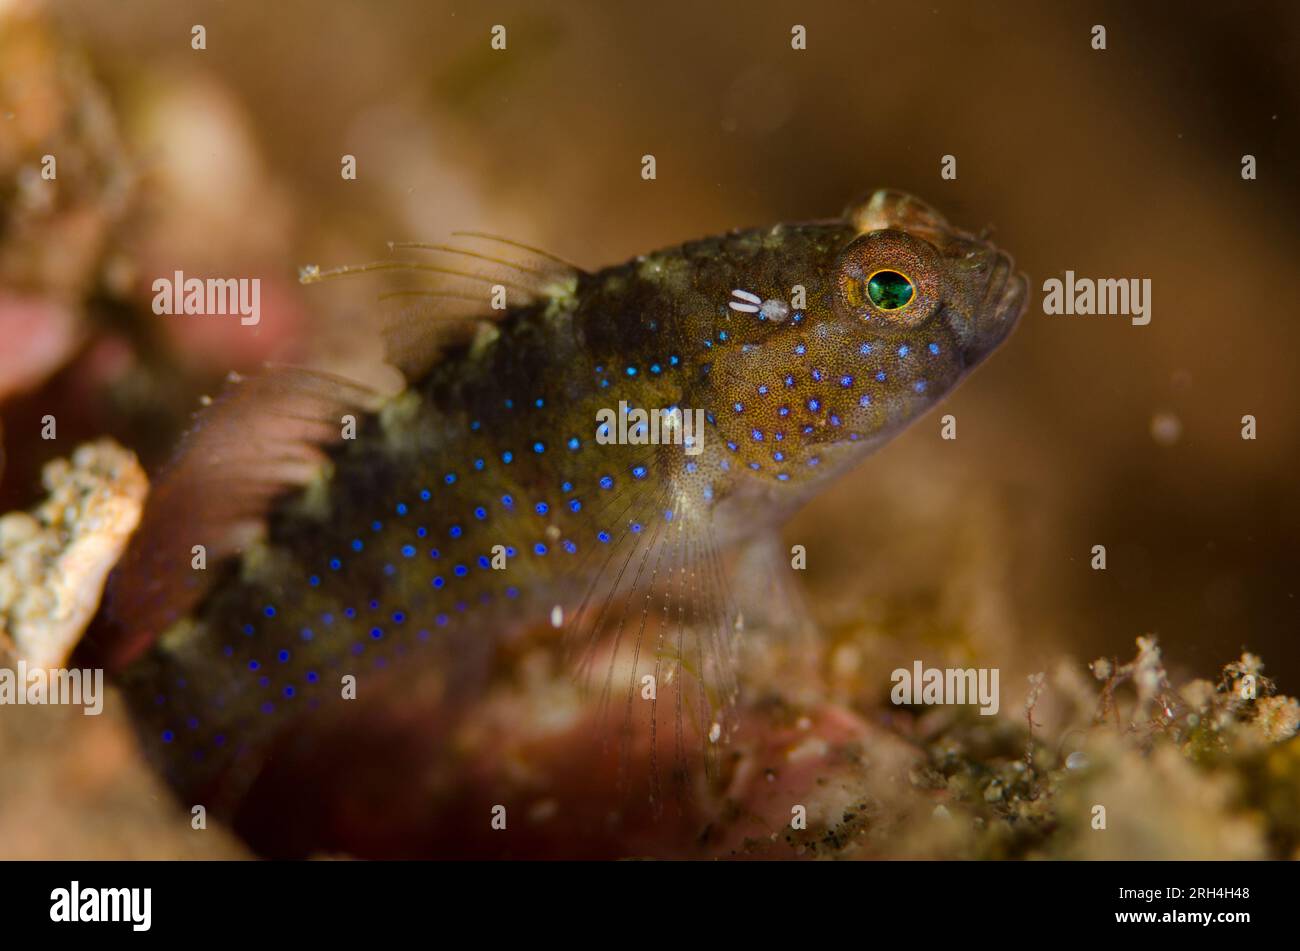 Starry Goby, Asterropteryx semipunctata, with parasitic Copepod, Cardiodectes sp, with egg cases, Bianca dive site, Lembeh Straits, Sulawesi, Indonesi Stock Photo